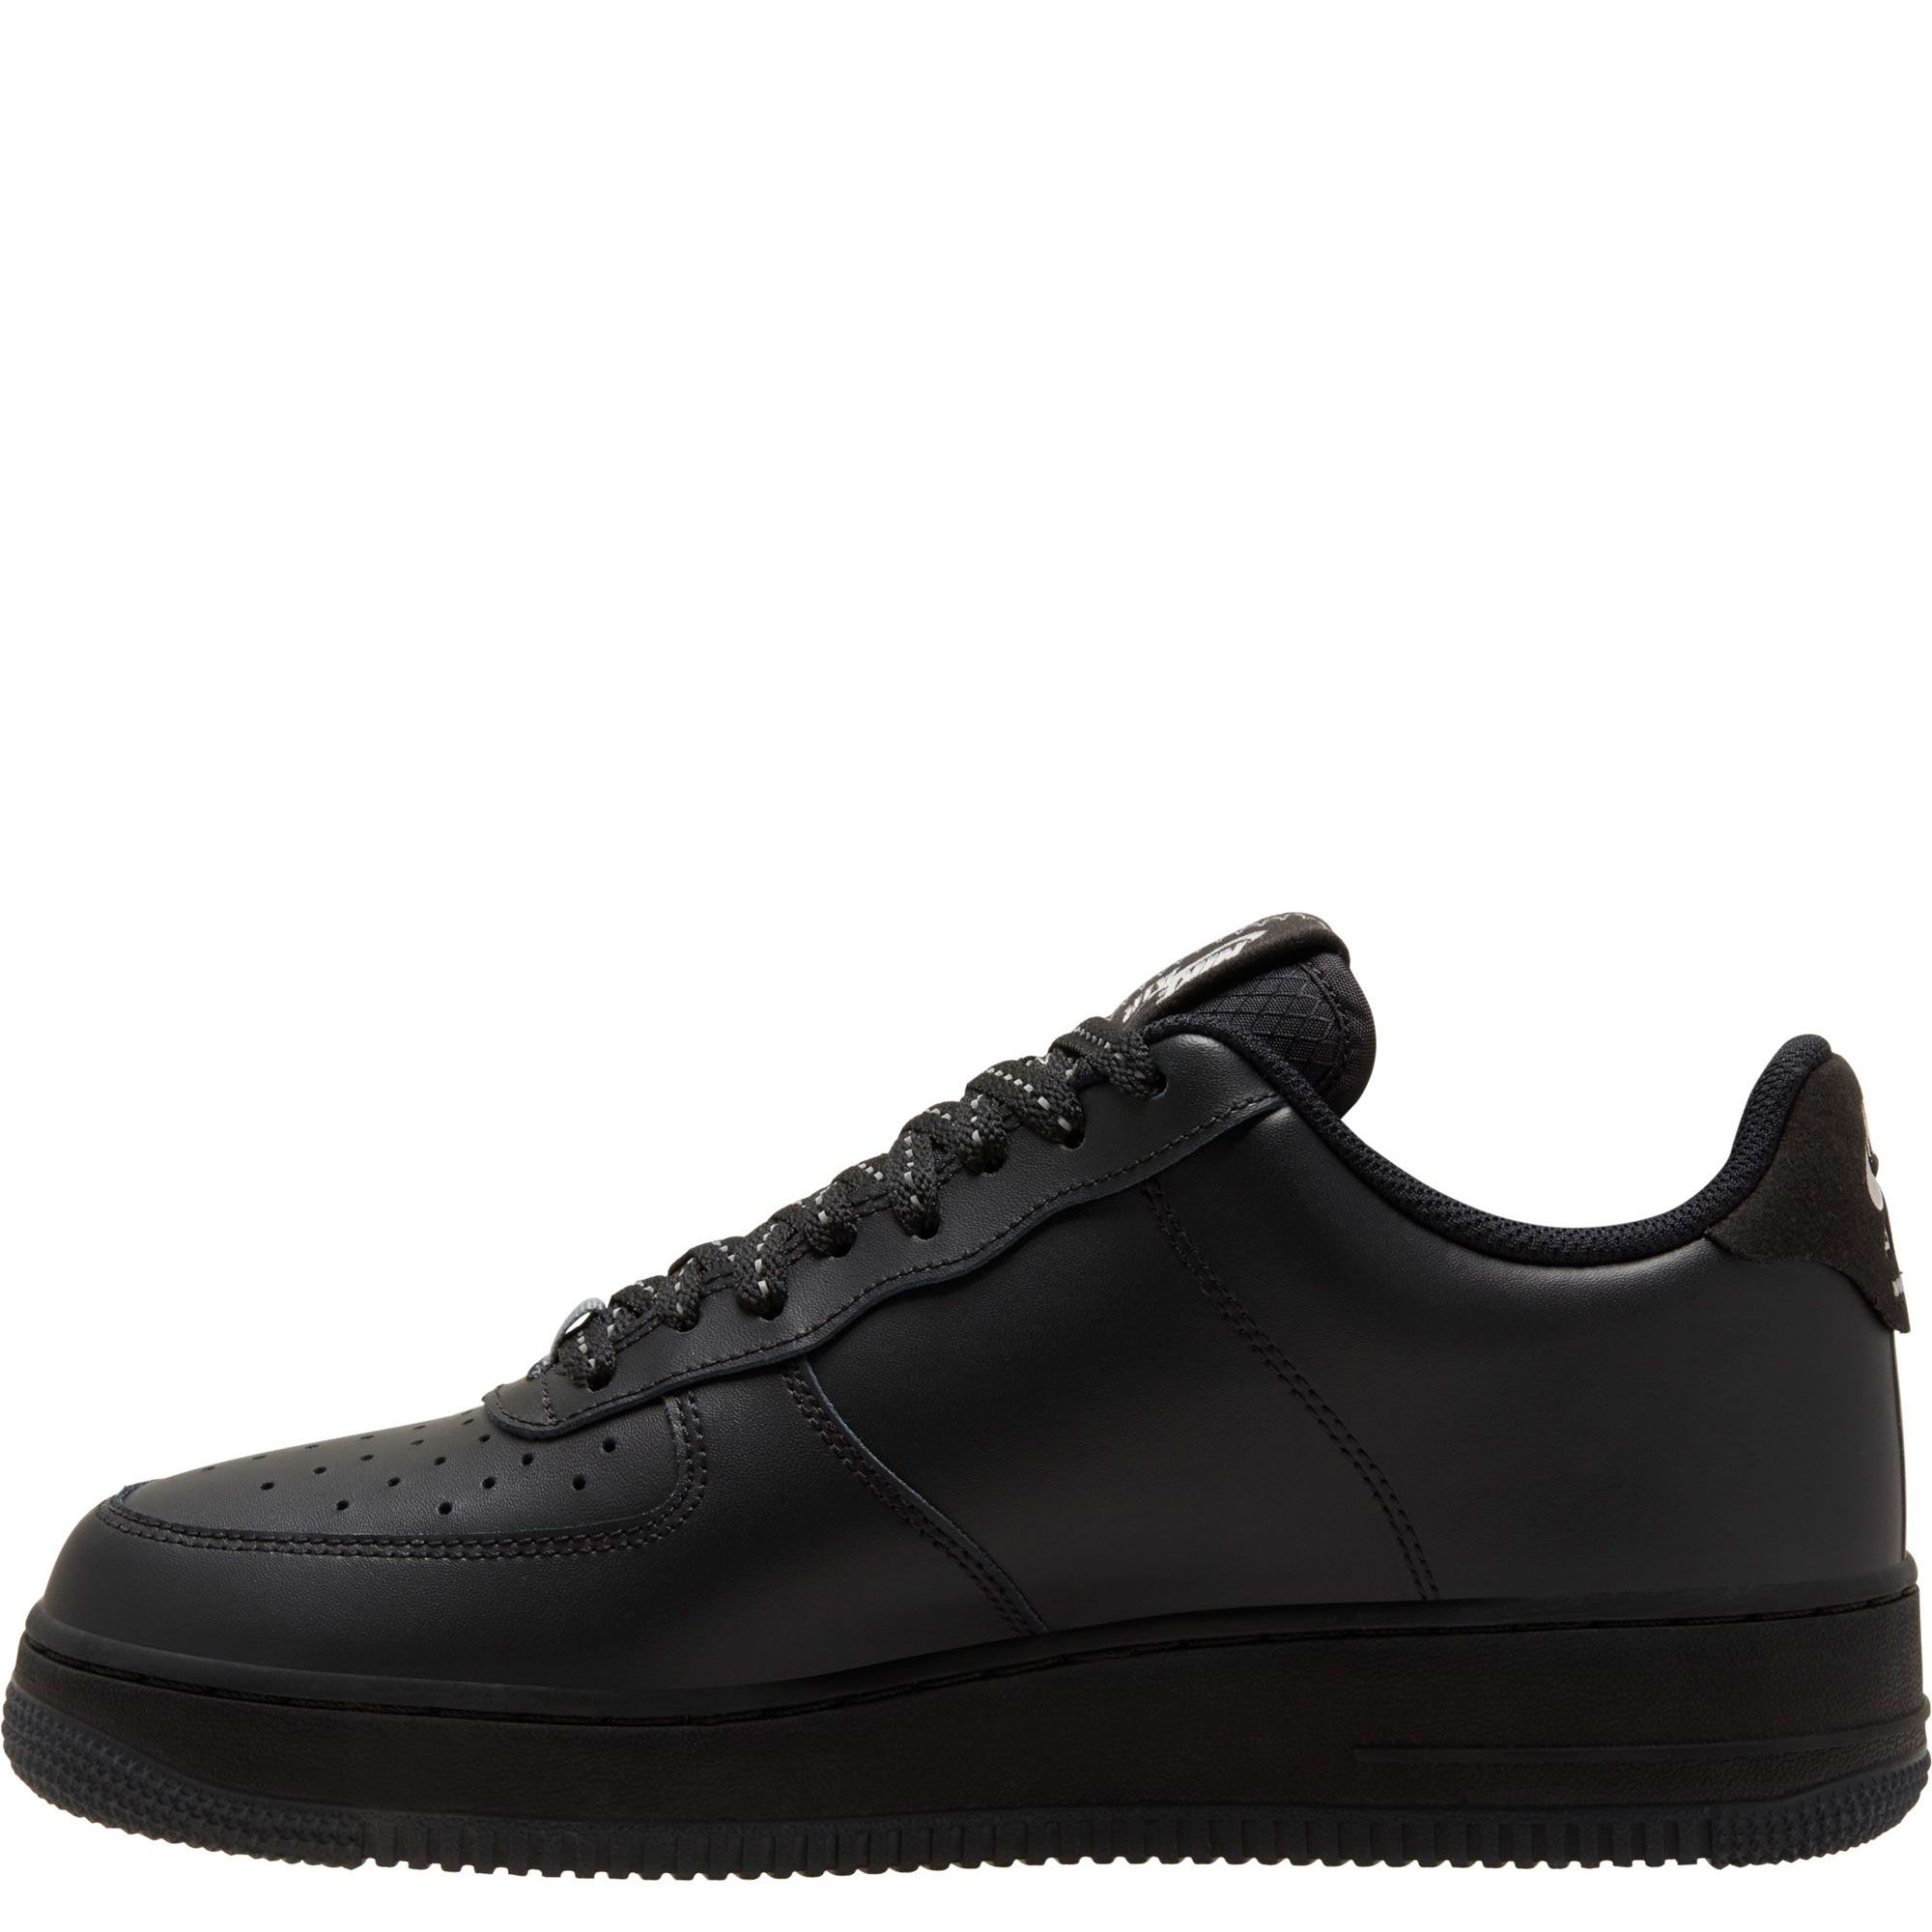 Nike Air Force 1 '07 LV8 Black/Silver/Anthracite